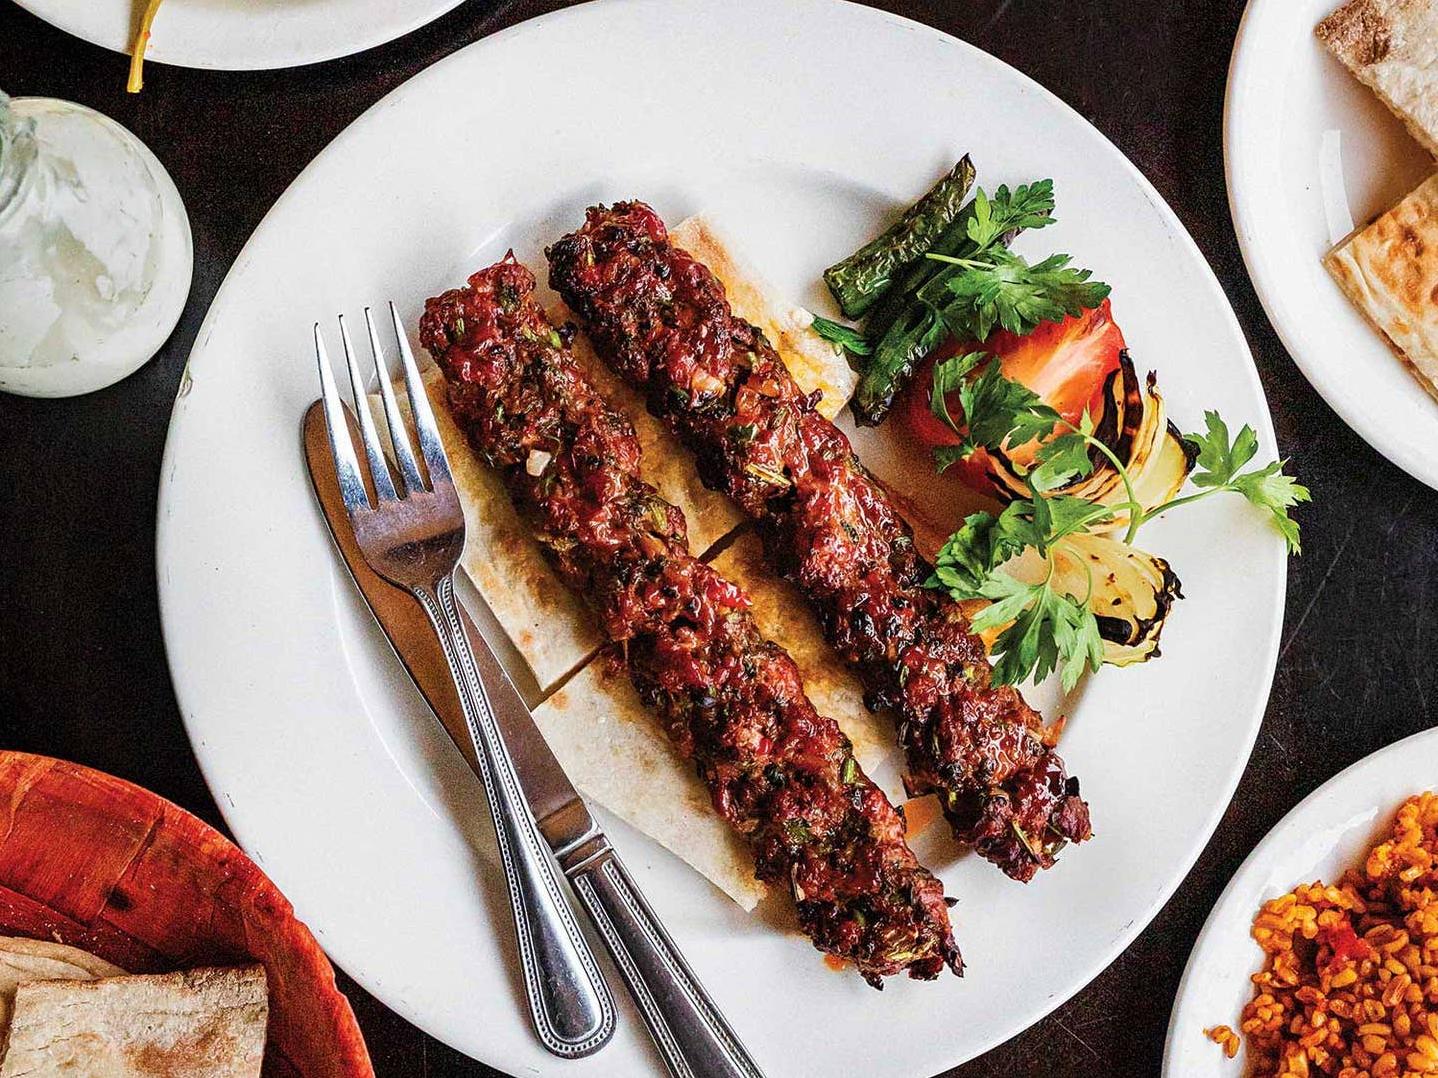  This kebab has a fiery taste that you won't forget!